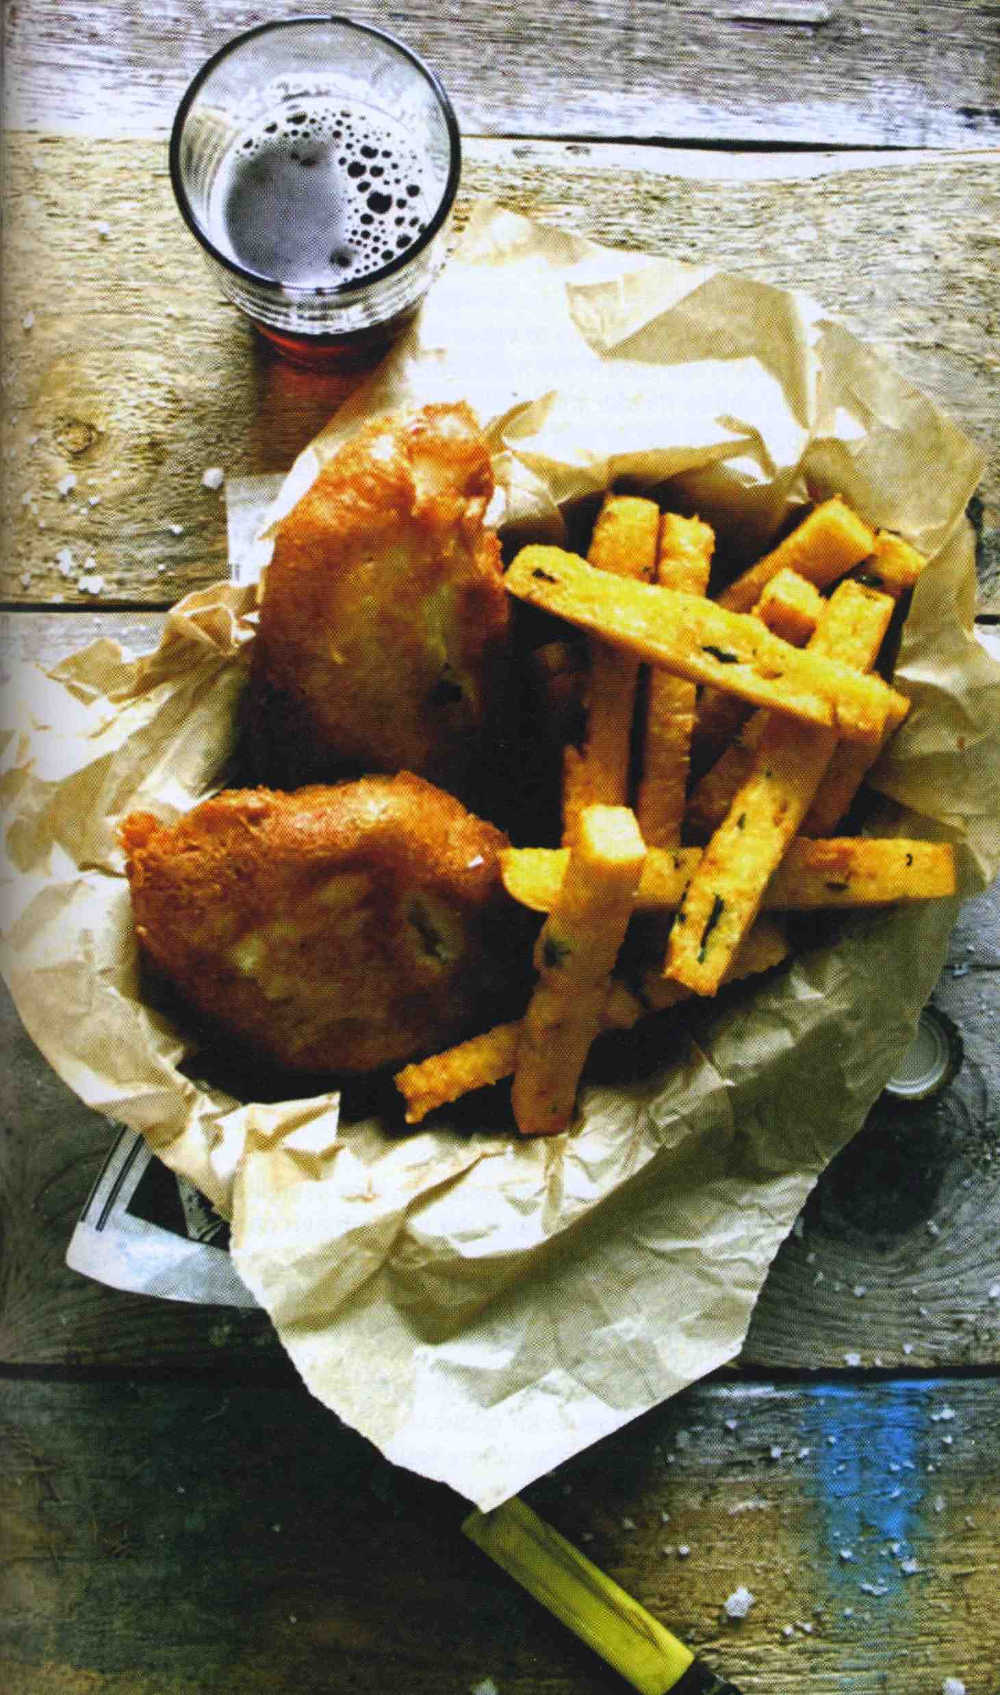 Irish Ale-Battered Fish with Chickpea Chips and Lemon Aioli